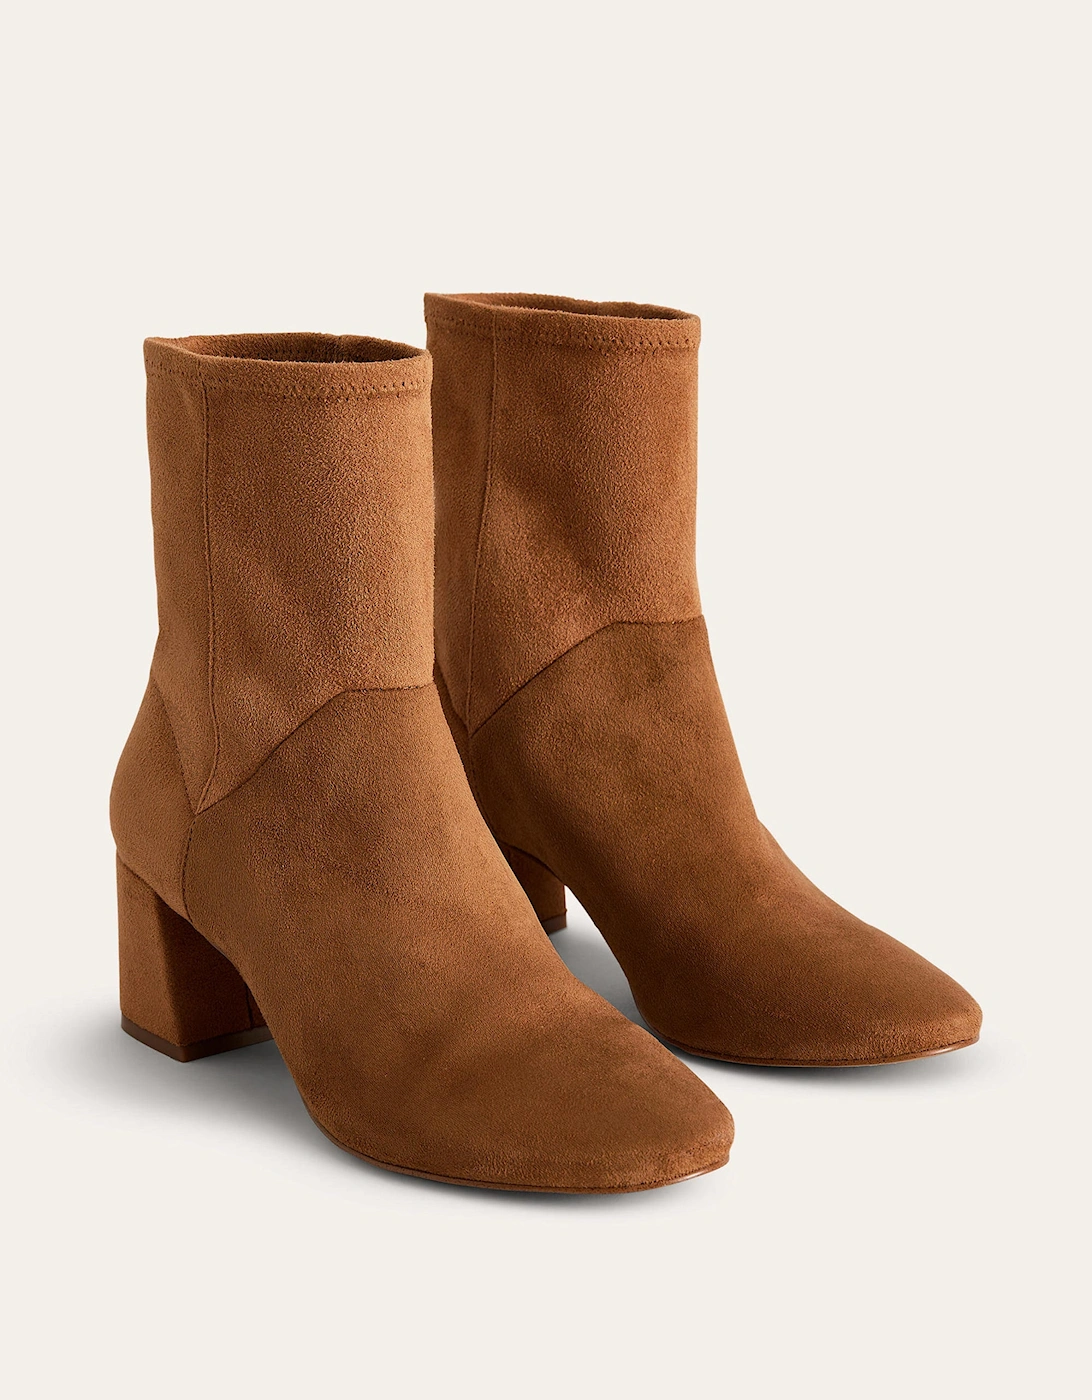 Cara Stretch Ankle Boot